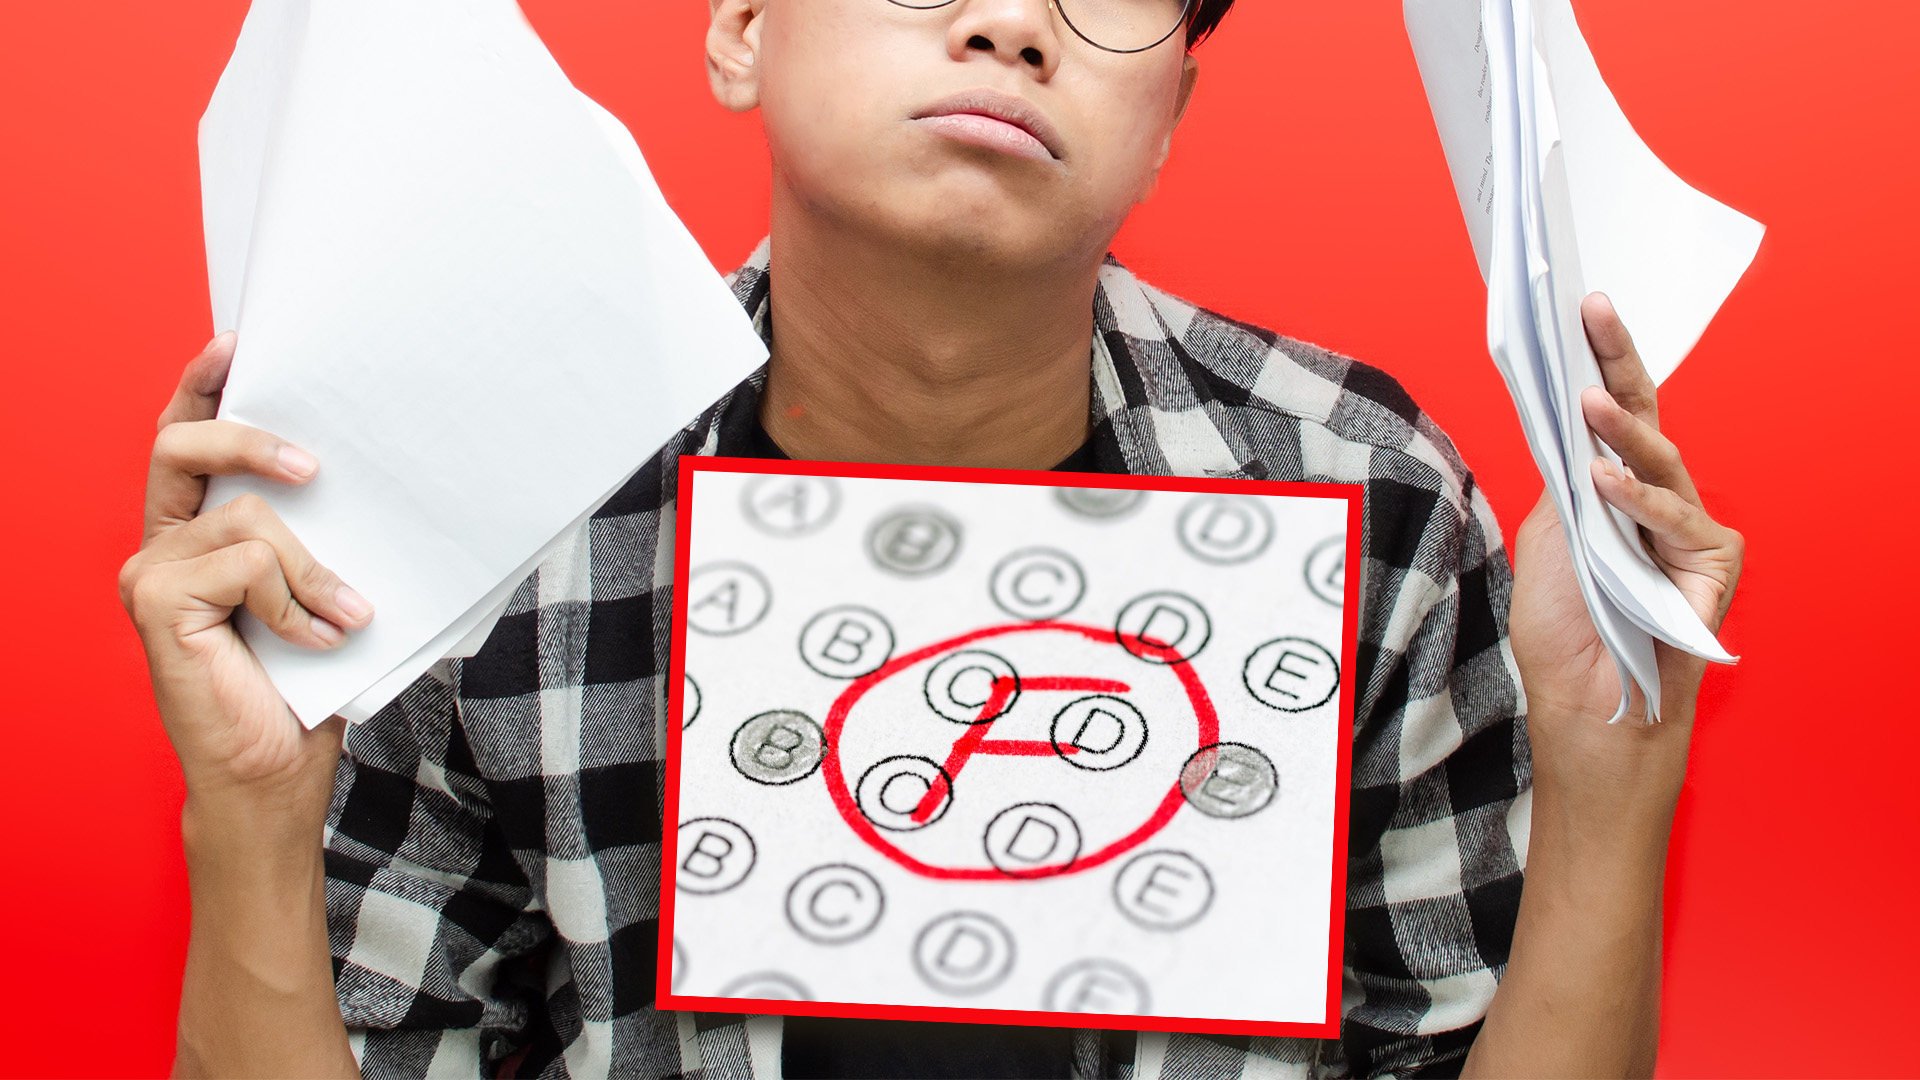 A student in China who set up an English learning blog to help himself and others learn the language has shut down his online operation and apologised to his 92,000 followers after he flunked a crucial national examination. Photo: SCMP composite/Shutterstock